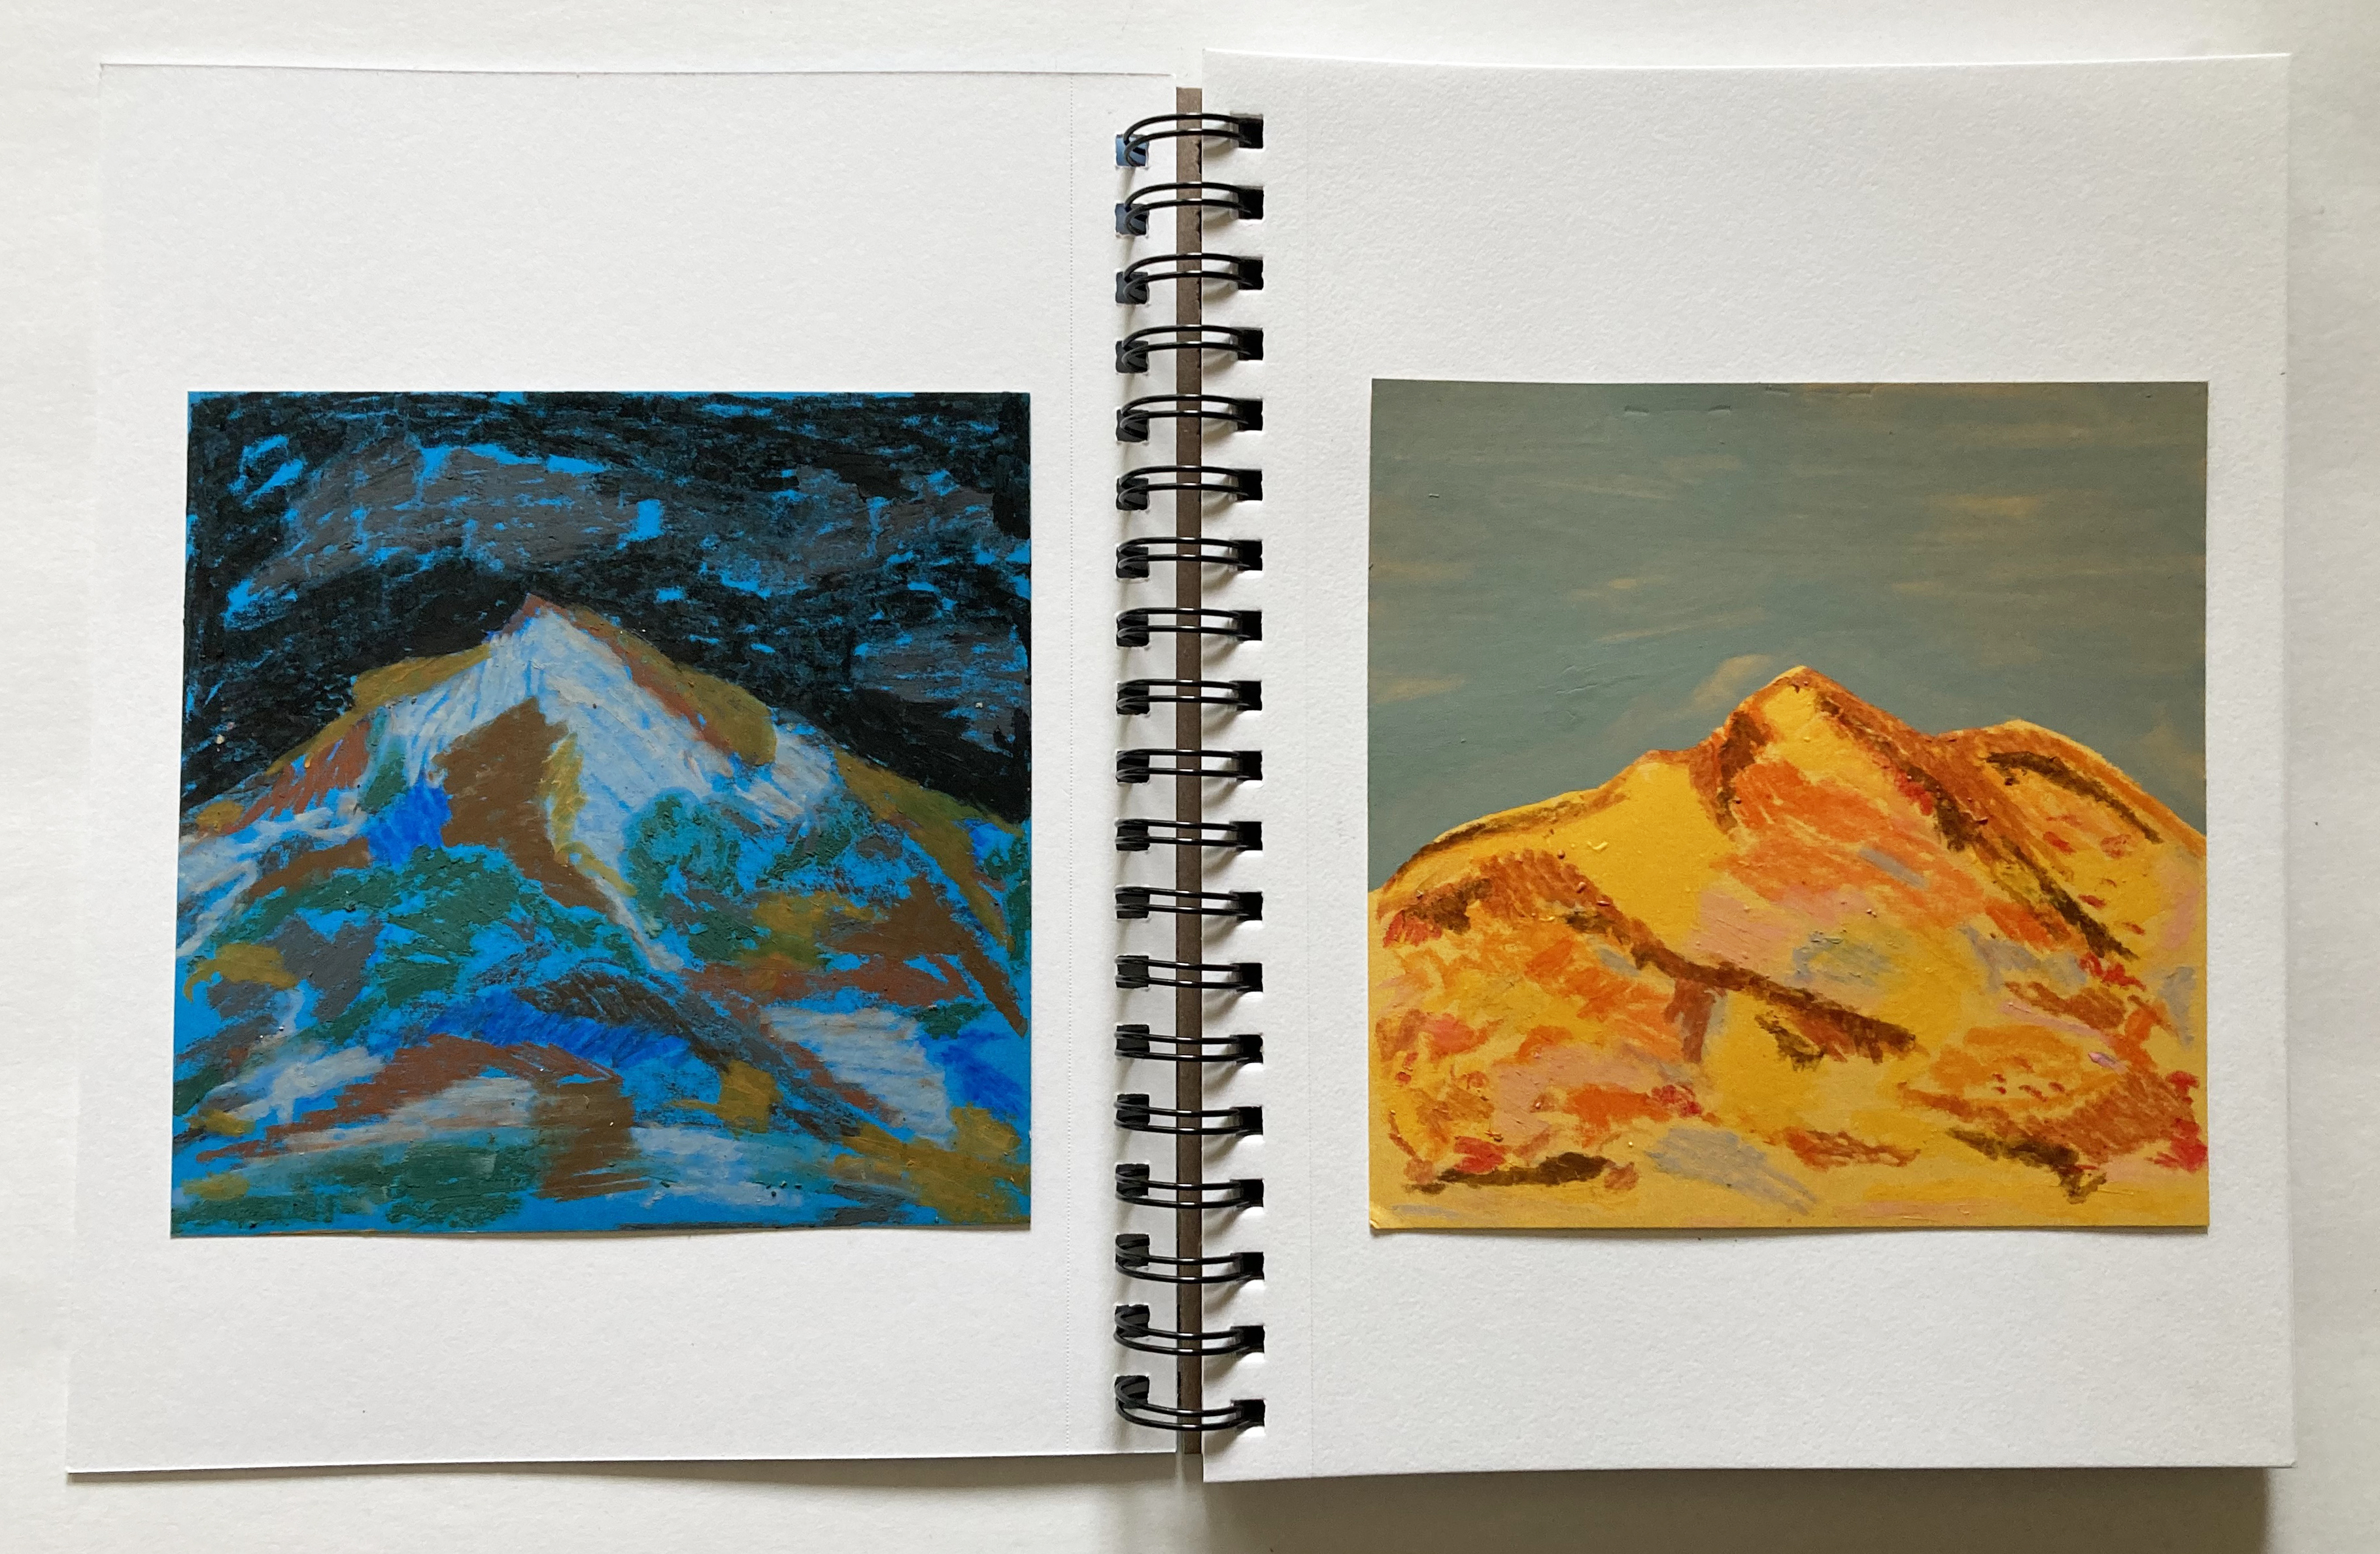 A spiral-bound journal is open. The pages are white with images. On the left, blyes, browns and greens create a night scene of a mountain. The left, yellows and oranges create a daytime scene.